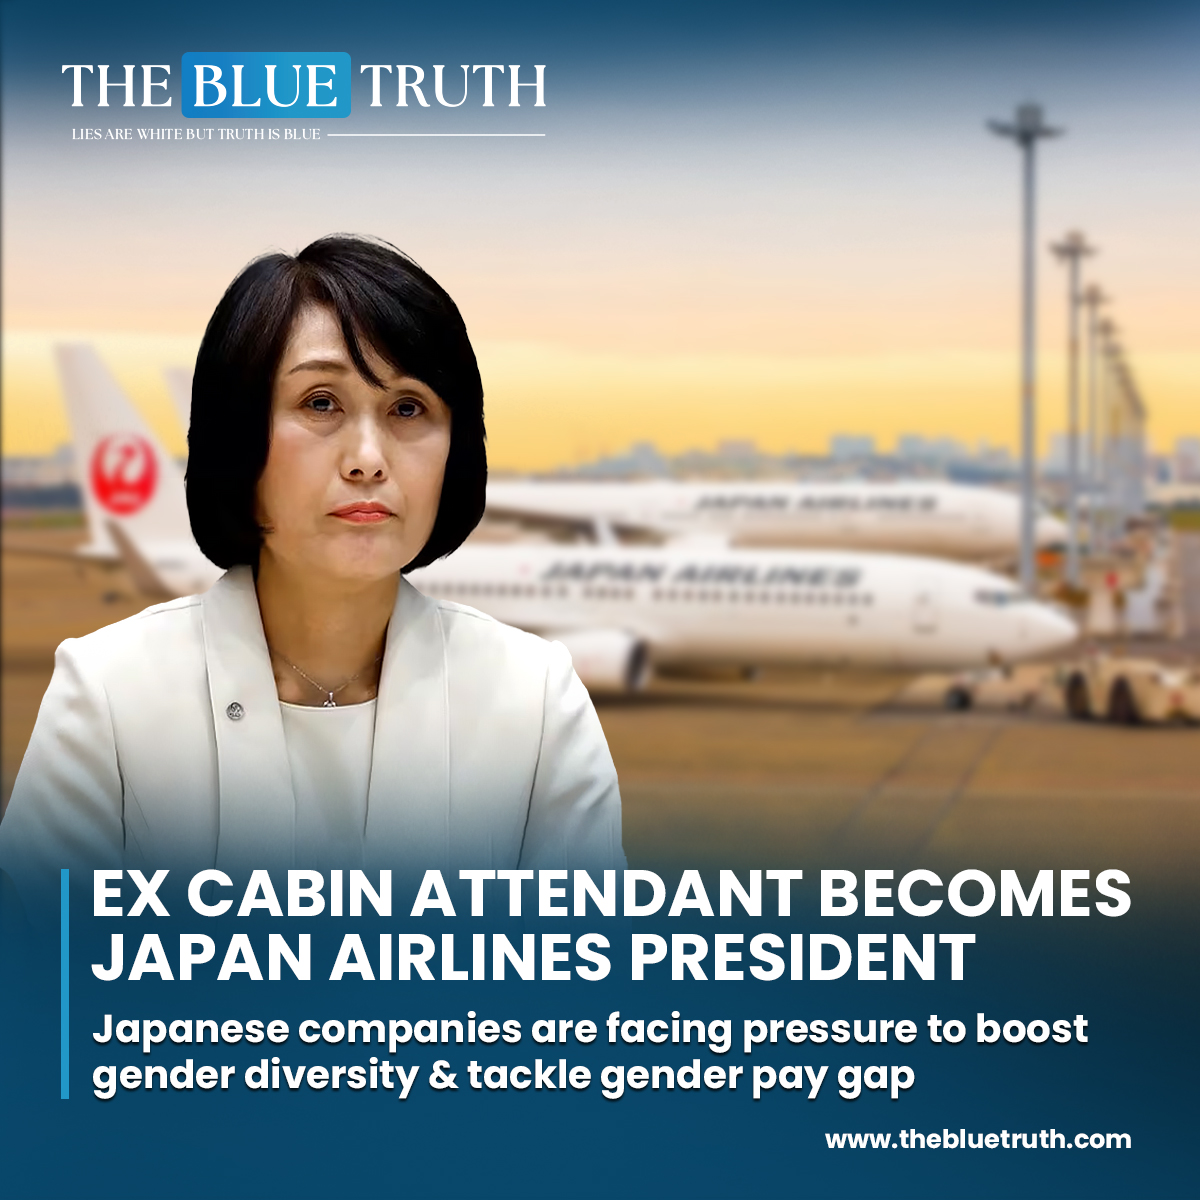 The appointment comes as Japanese companies face increasing pressure to boost gender diversity.
#JALPresident #AviationLeadership #AirlineExecutive #CareerSuccess
#FormerCabinAttendant #ProfessionalJourney #CorporateLeadership #tbt #TheBlueTruth